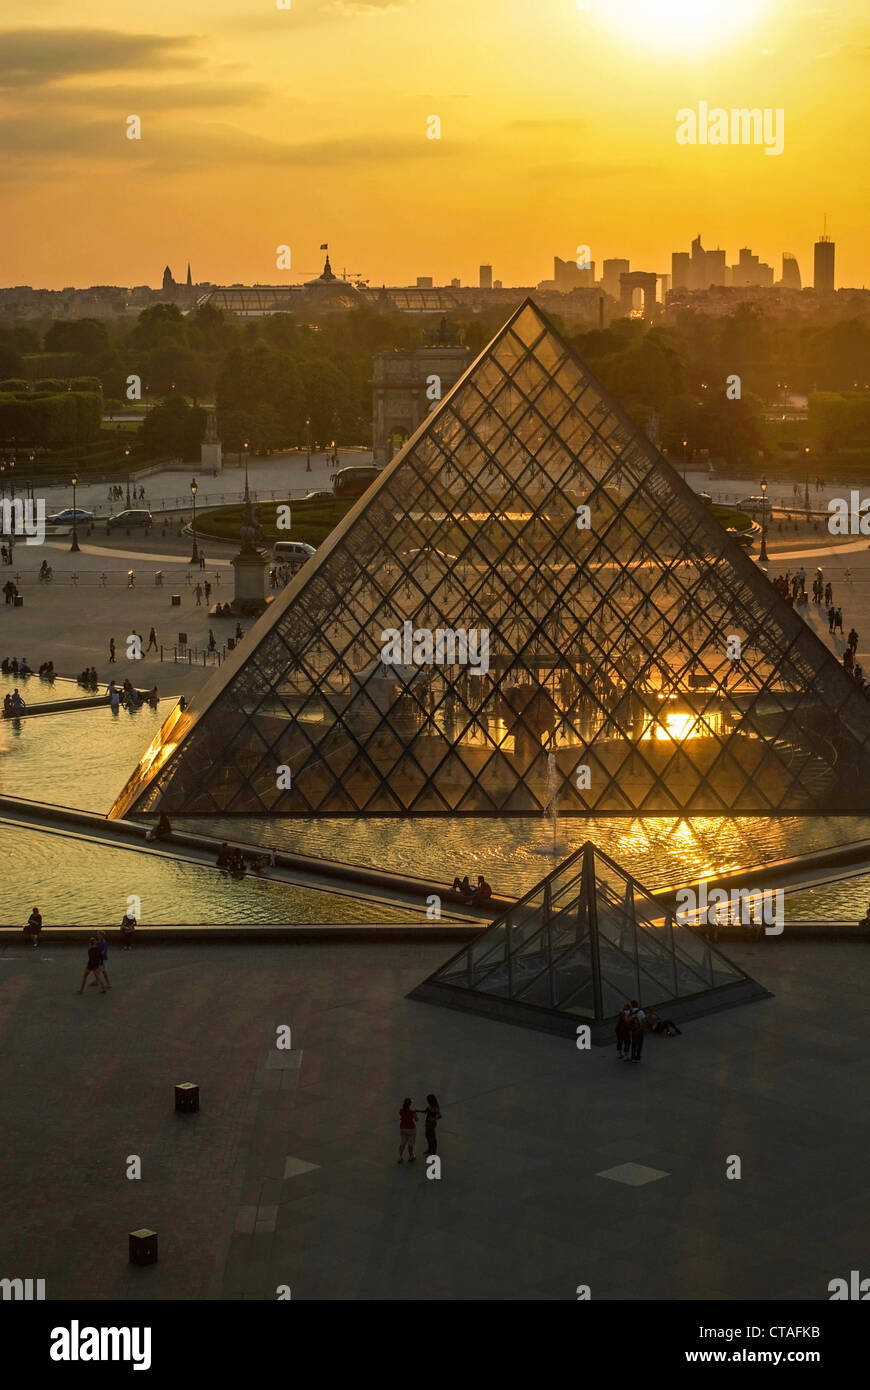 The louvre pyramid in Paris Stock Photo